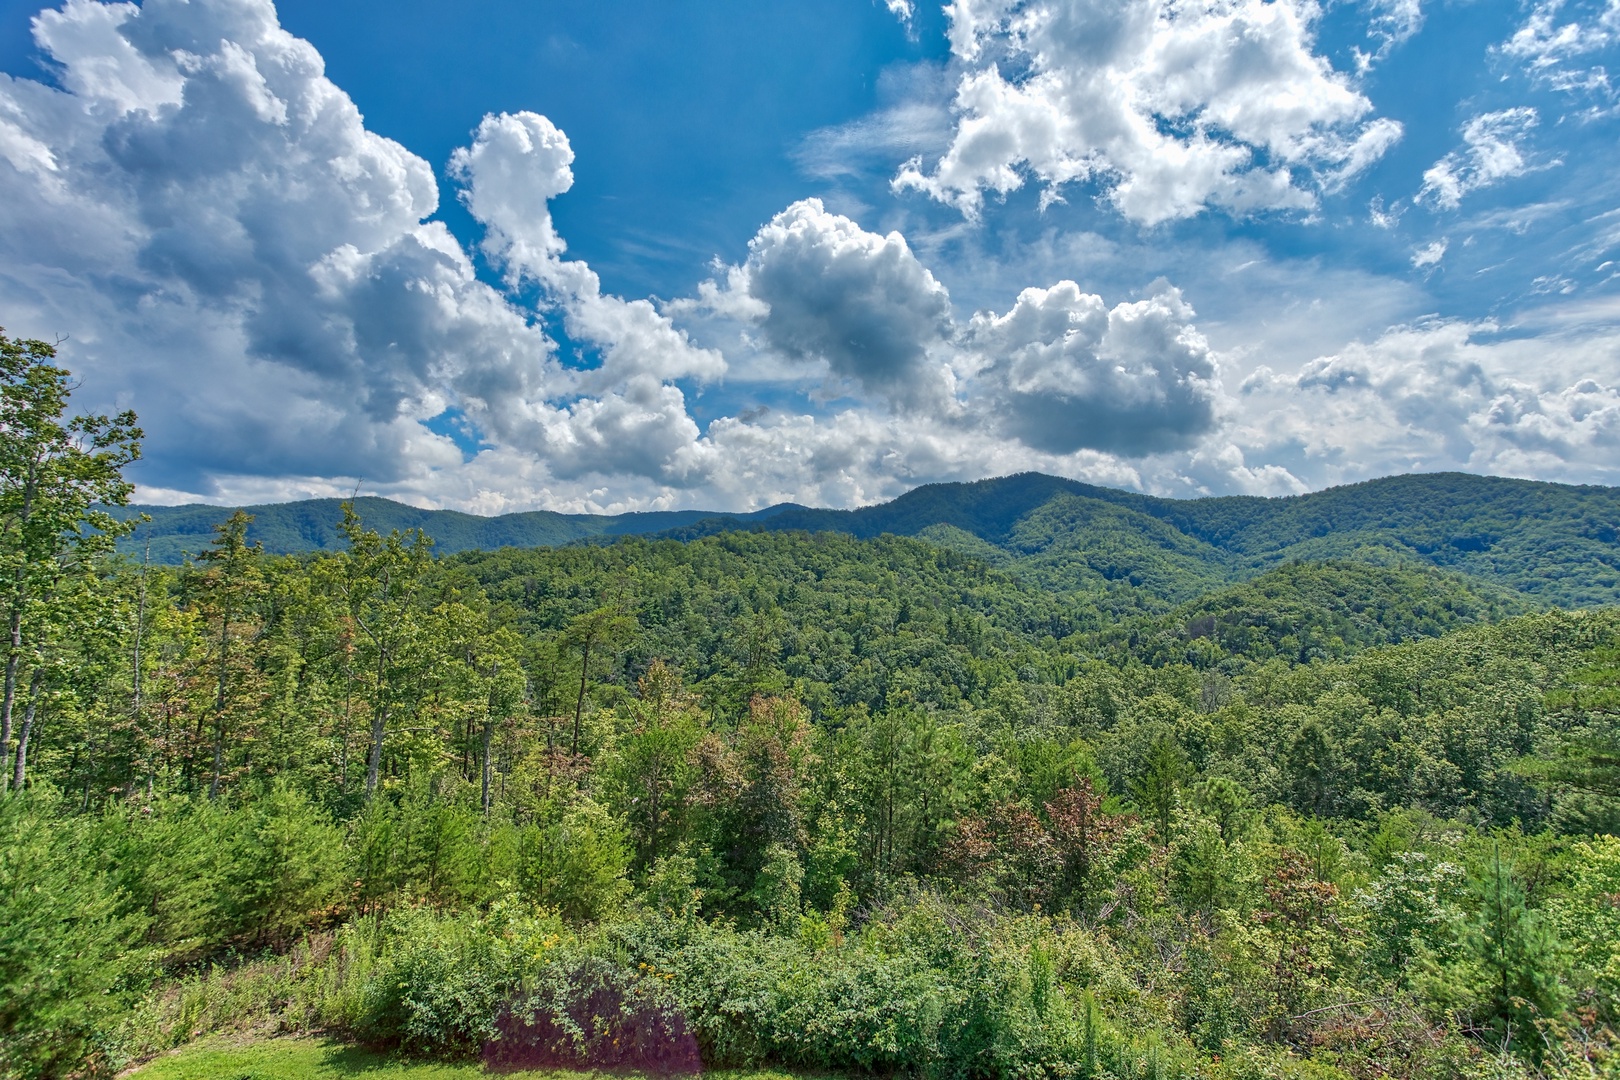 Mountain views seen at Four Seasons Lodge, a 3-bedroom cabin rental located in Pigeon Forge